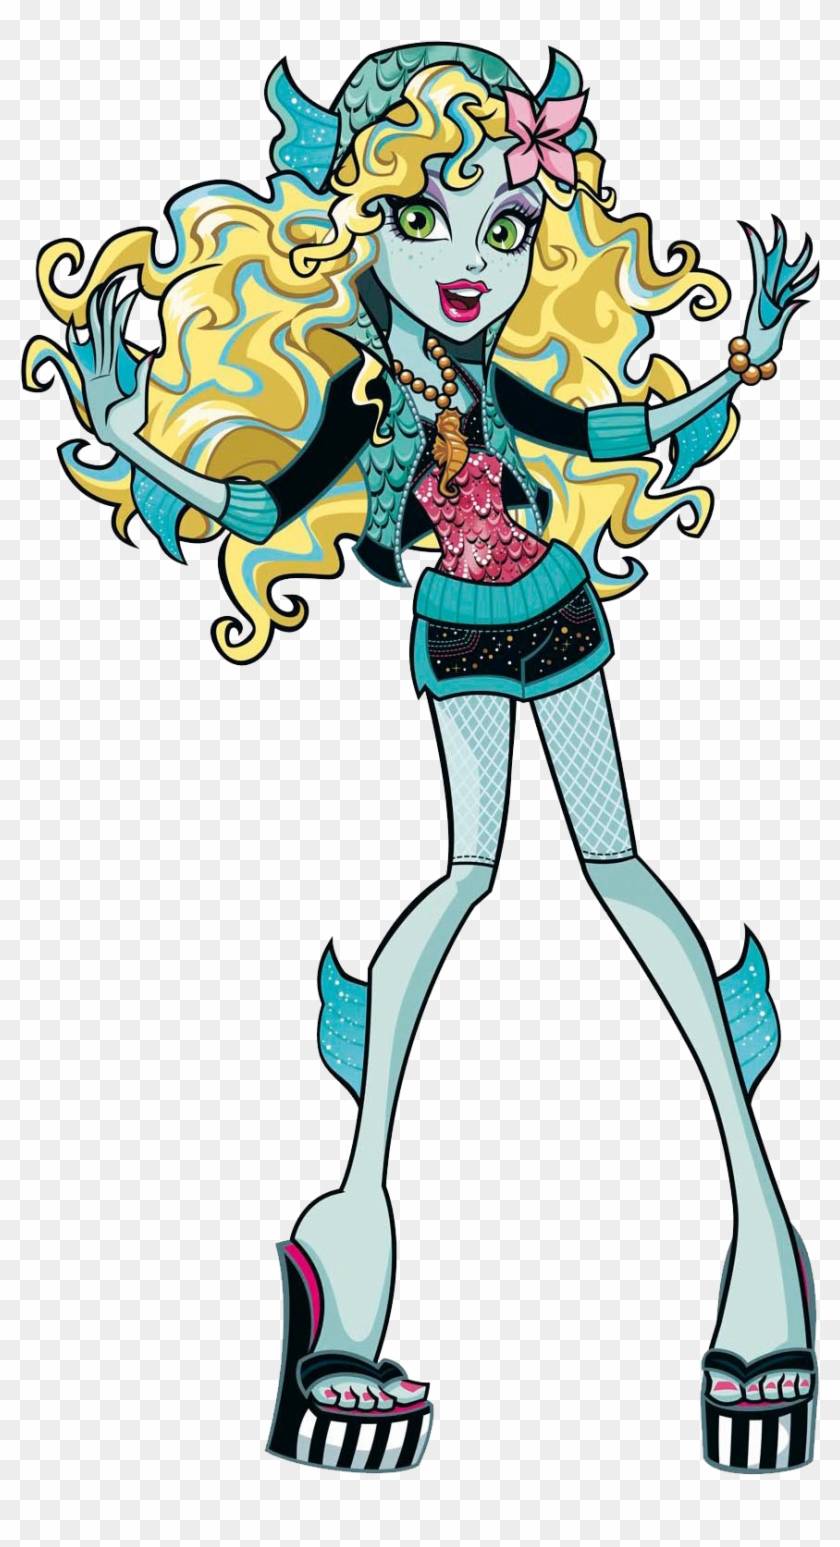 Lagoona Blue Is The Daughter Of A Sea Creature - Lagoona Blue From Monster High #714575